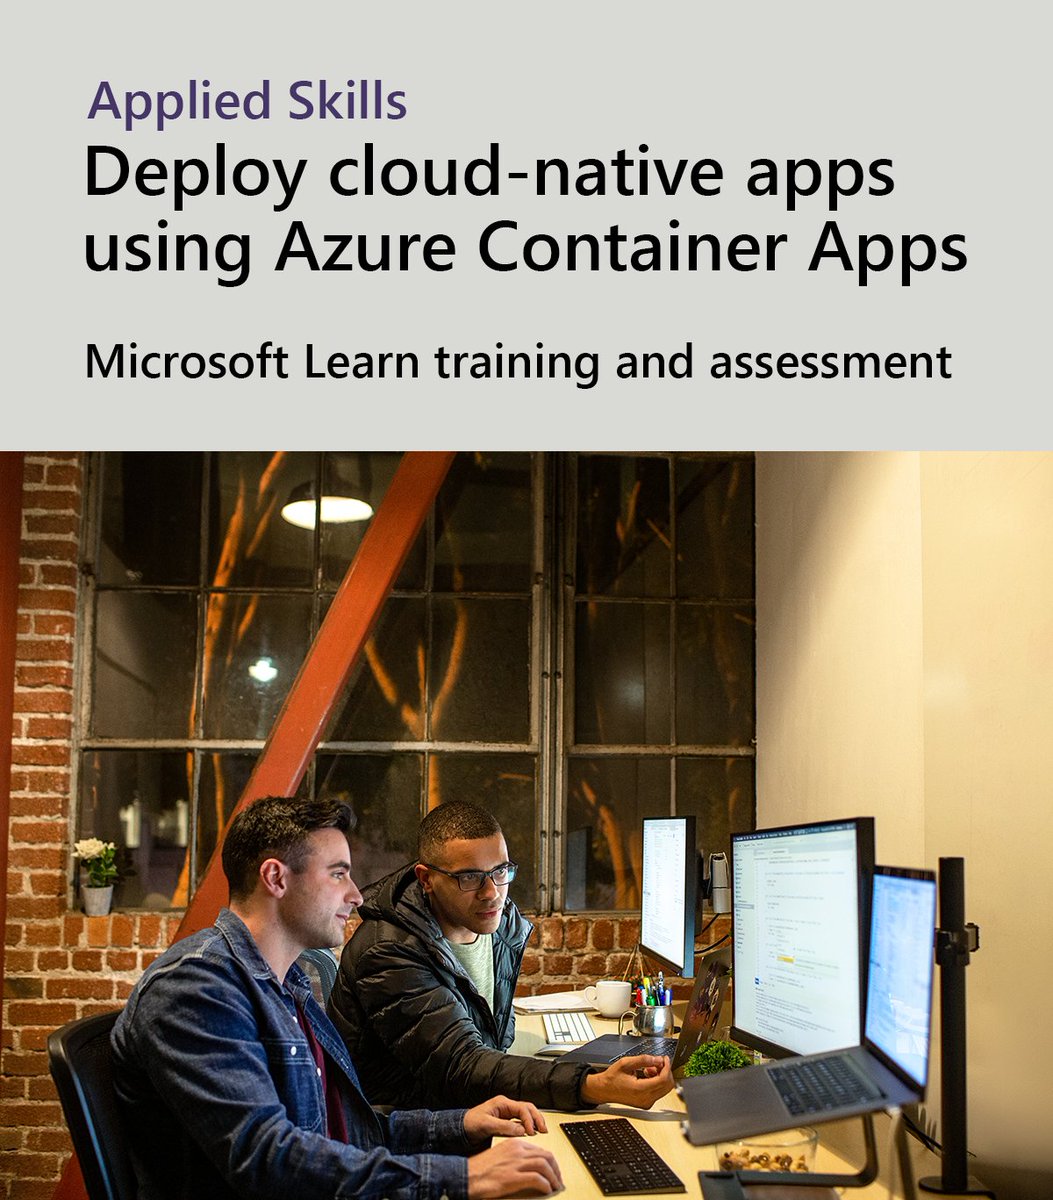 Learn how to build, deploy, scale, and manage containerized #CloudNative apps using Azure Container Apps, Azure Container Registry, and Azure Pipelines. #Azure msft.it/6015cNmkv